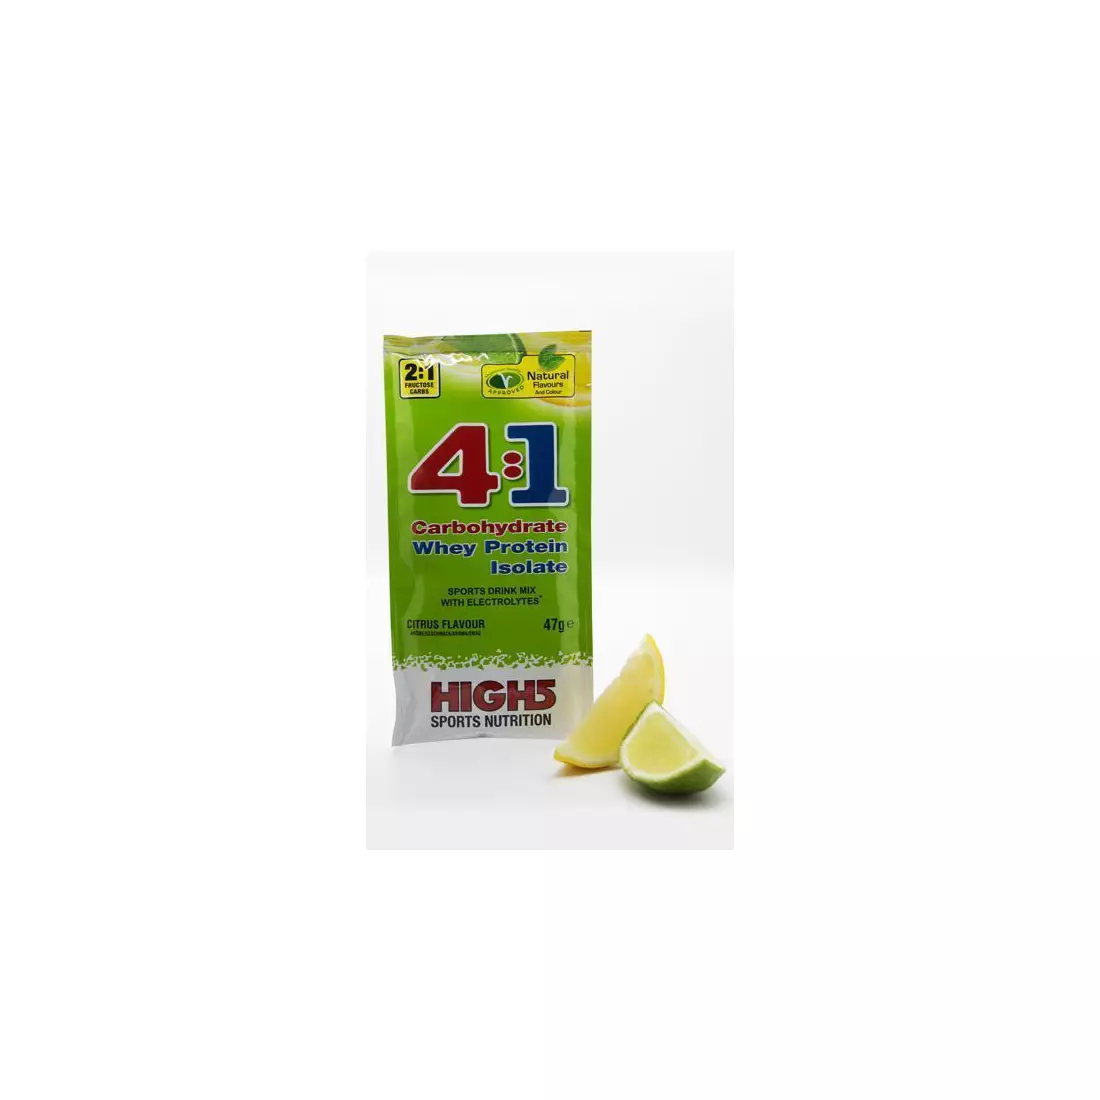 HIGH5 Energy Source 4:1 carbohydrate-protein drink powder to dissolve, sachet 47 g flavor: CITRUS